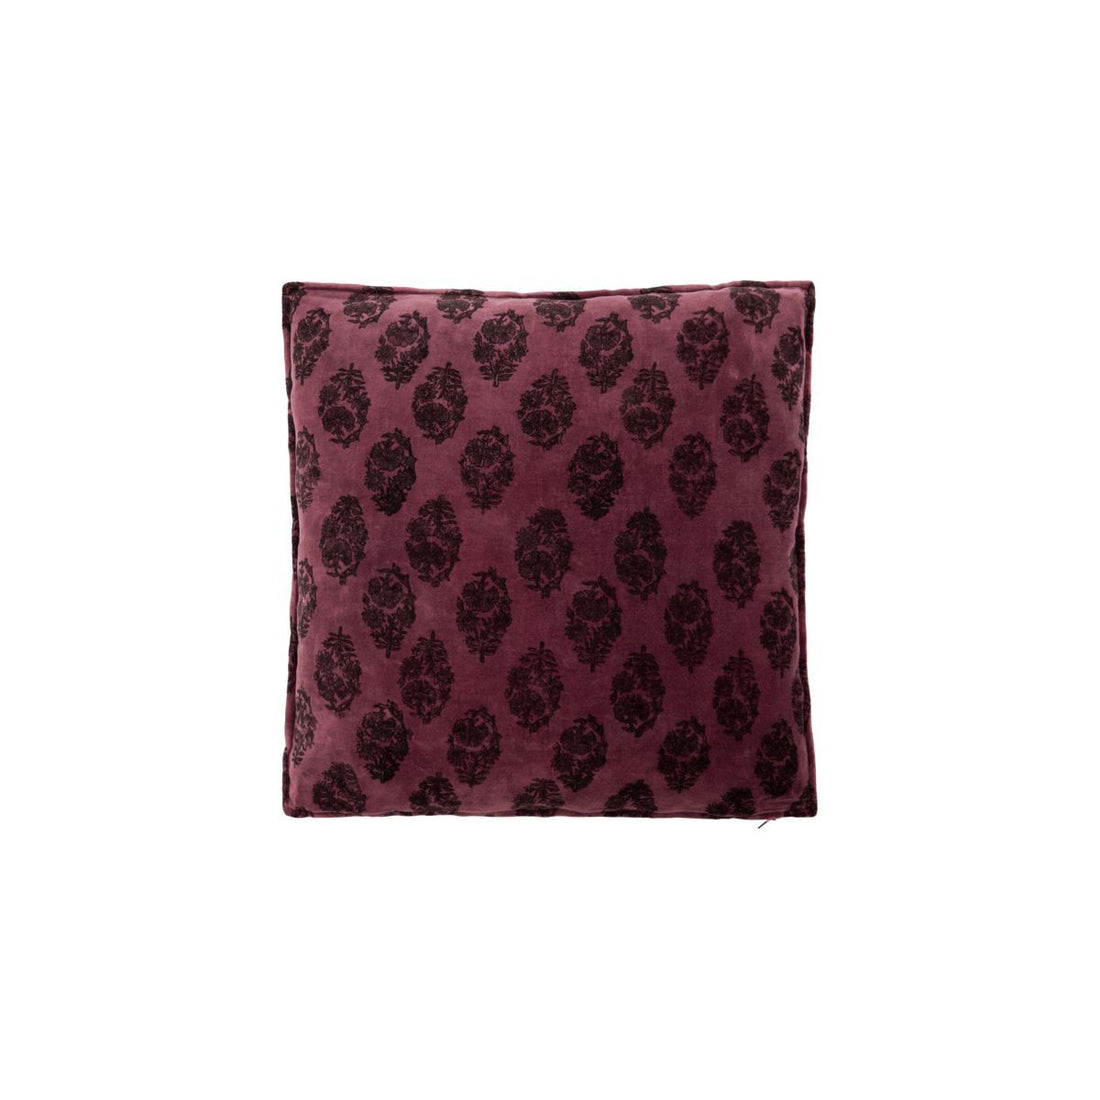 House Doctor Pillow Covers, Hdbetto, Plum